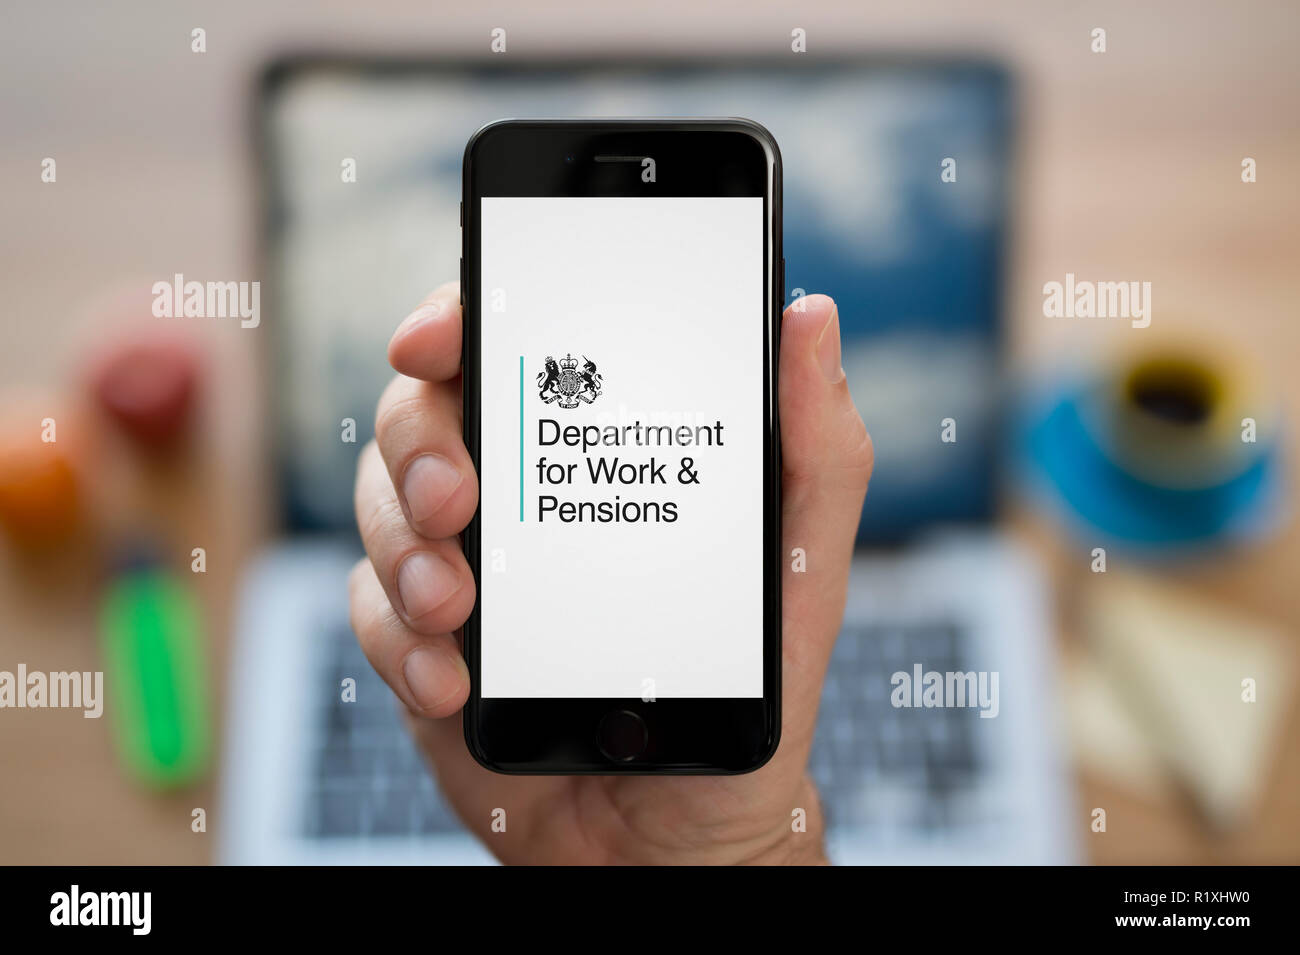 A man looks at his iPhone which displays the Department for Work and Pensions (DWP) logo, while sat at his computer desk (Editorial use only). Stock Photo